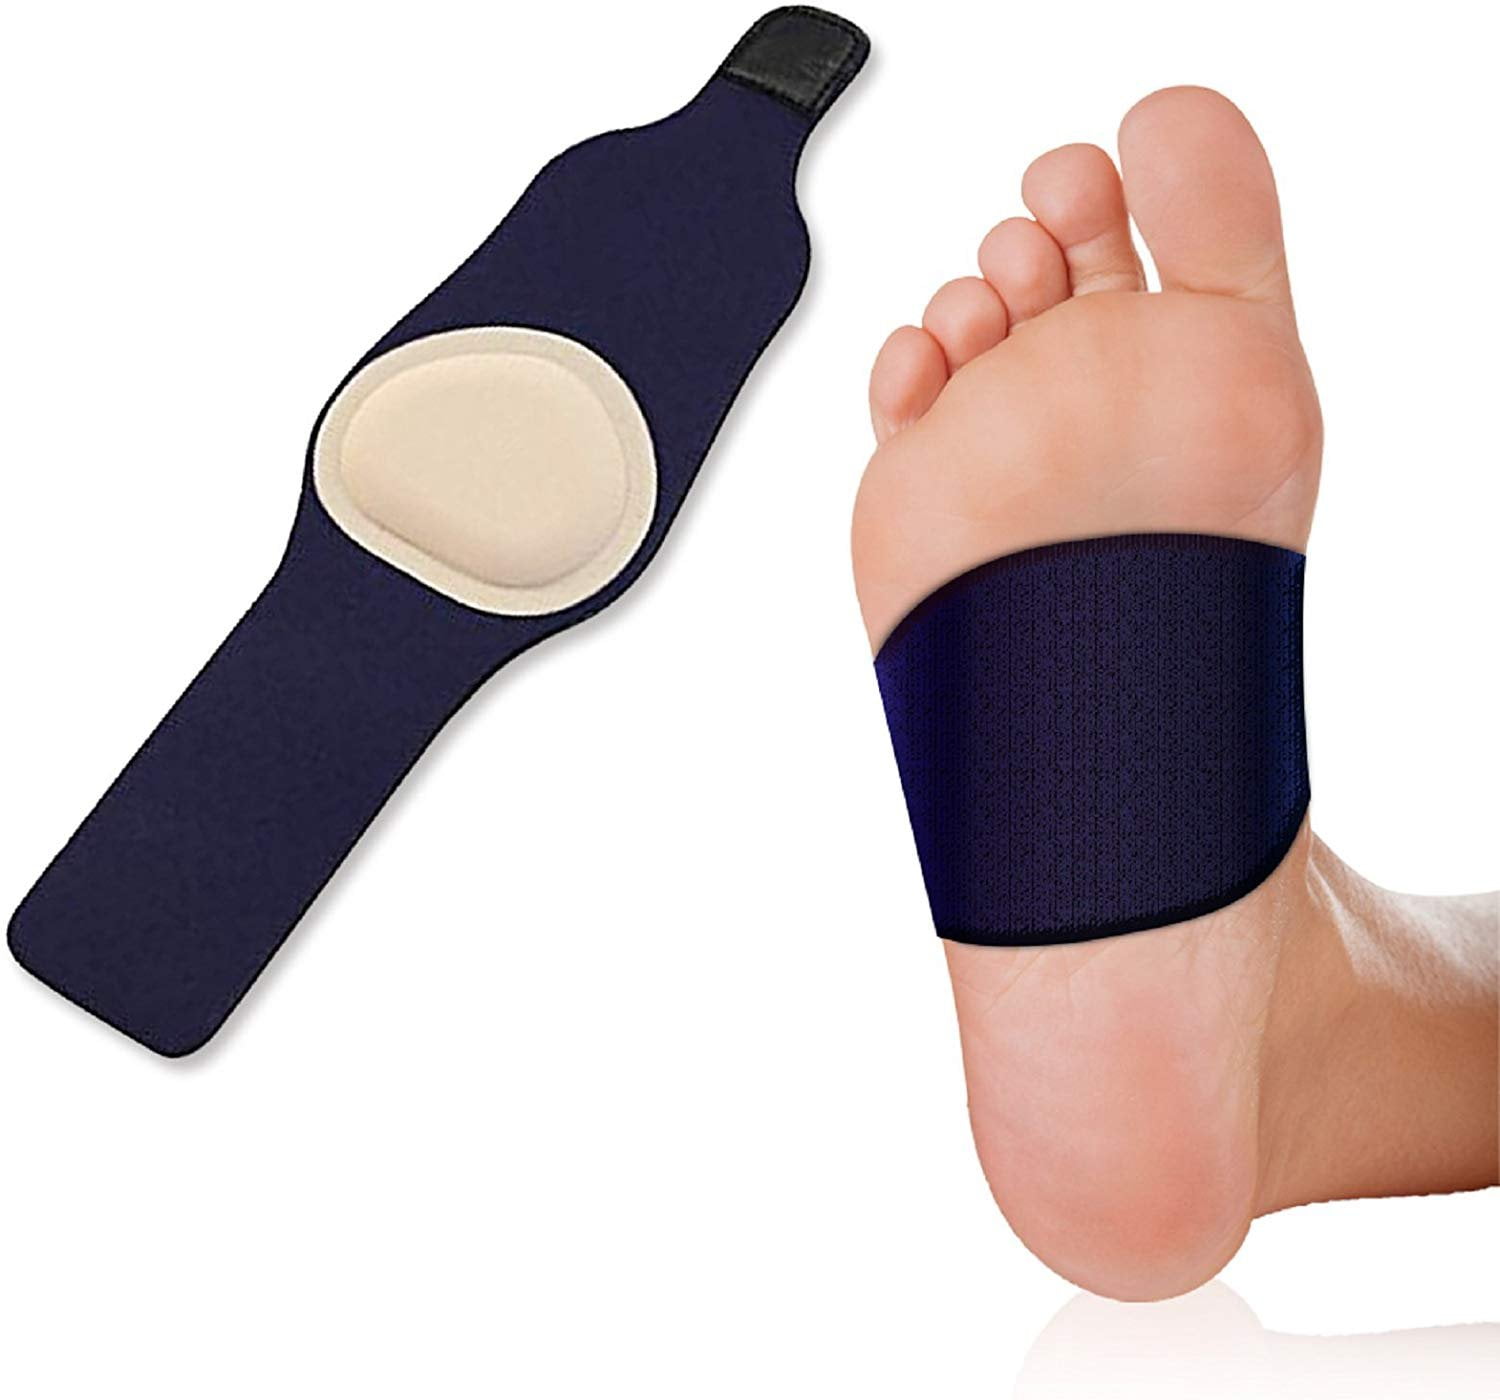 Details about   1x Pair Foot Support Pain Relief Plantar Arch Support Pad Cushion Pain Orthotic 